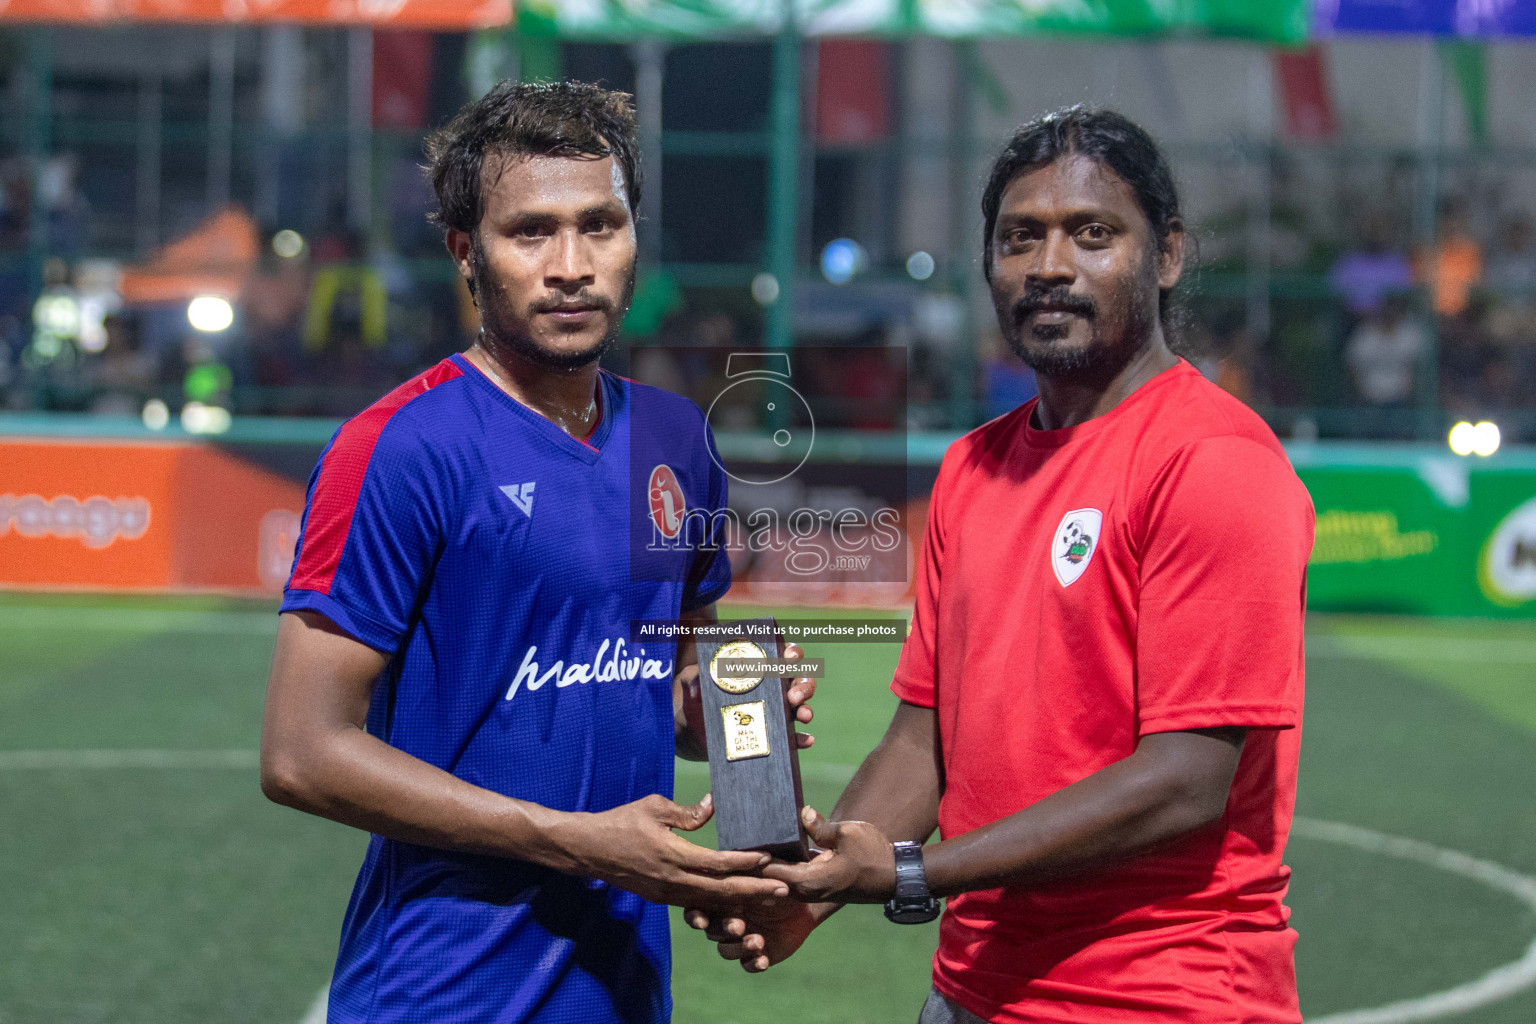 Club Maldives Day 6 in Hulhumale, Male', Maldives on 15th April 2019 Photos: Ismail Thoriq/images.mv